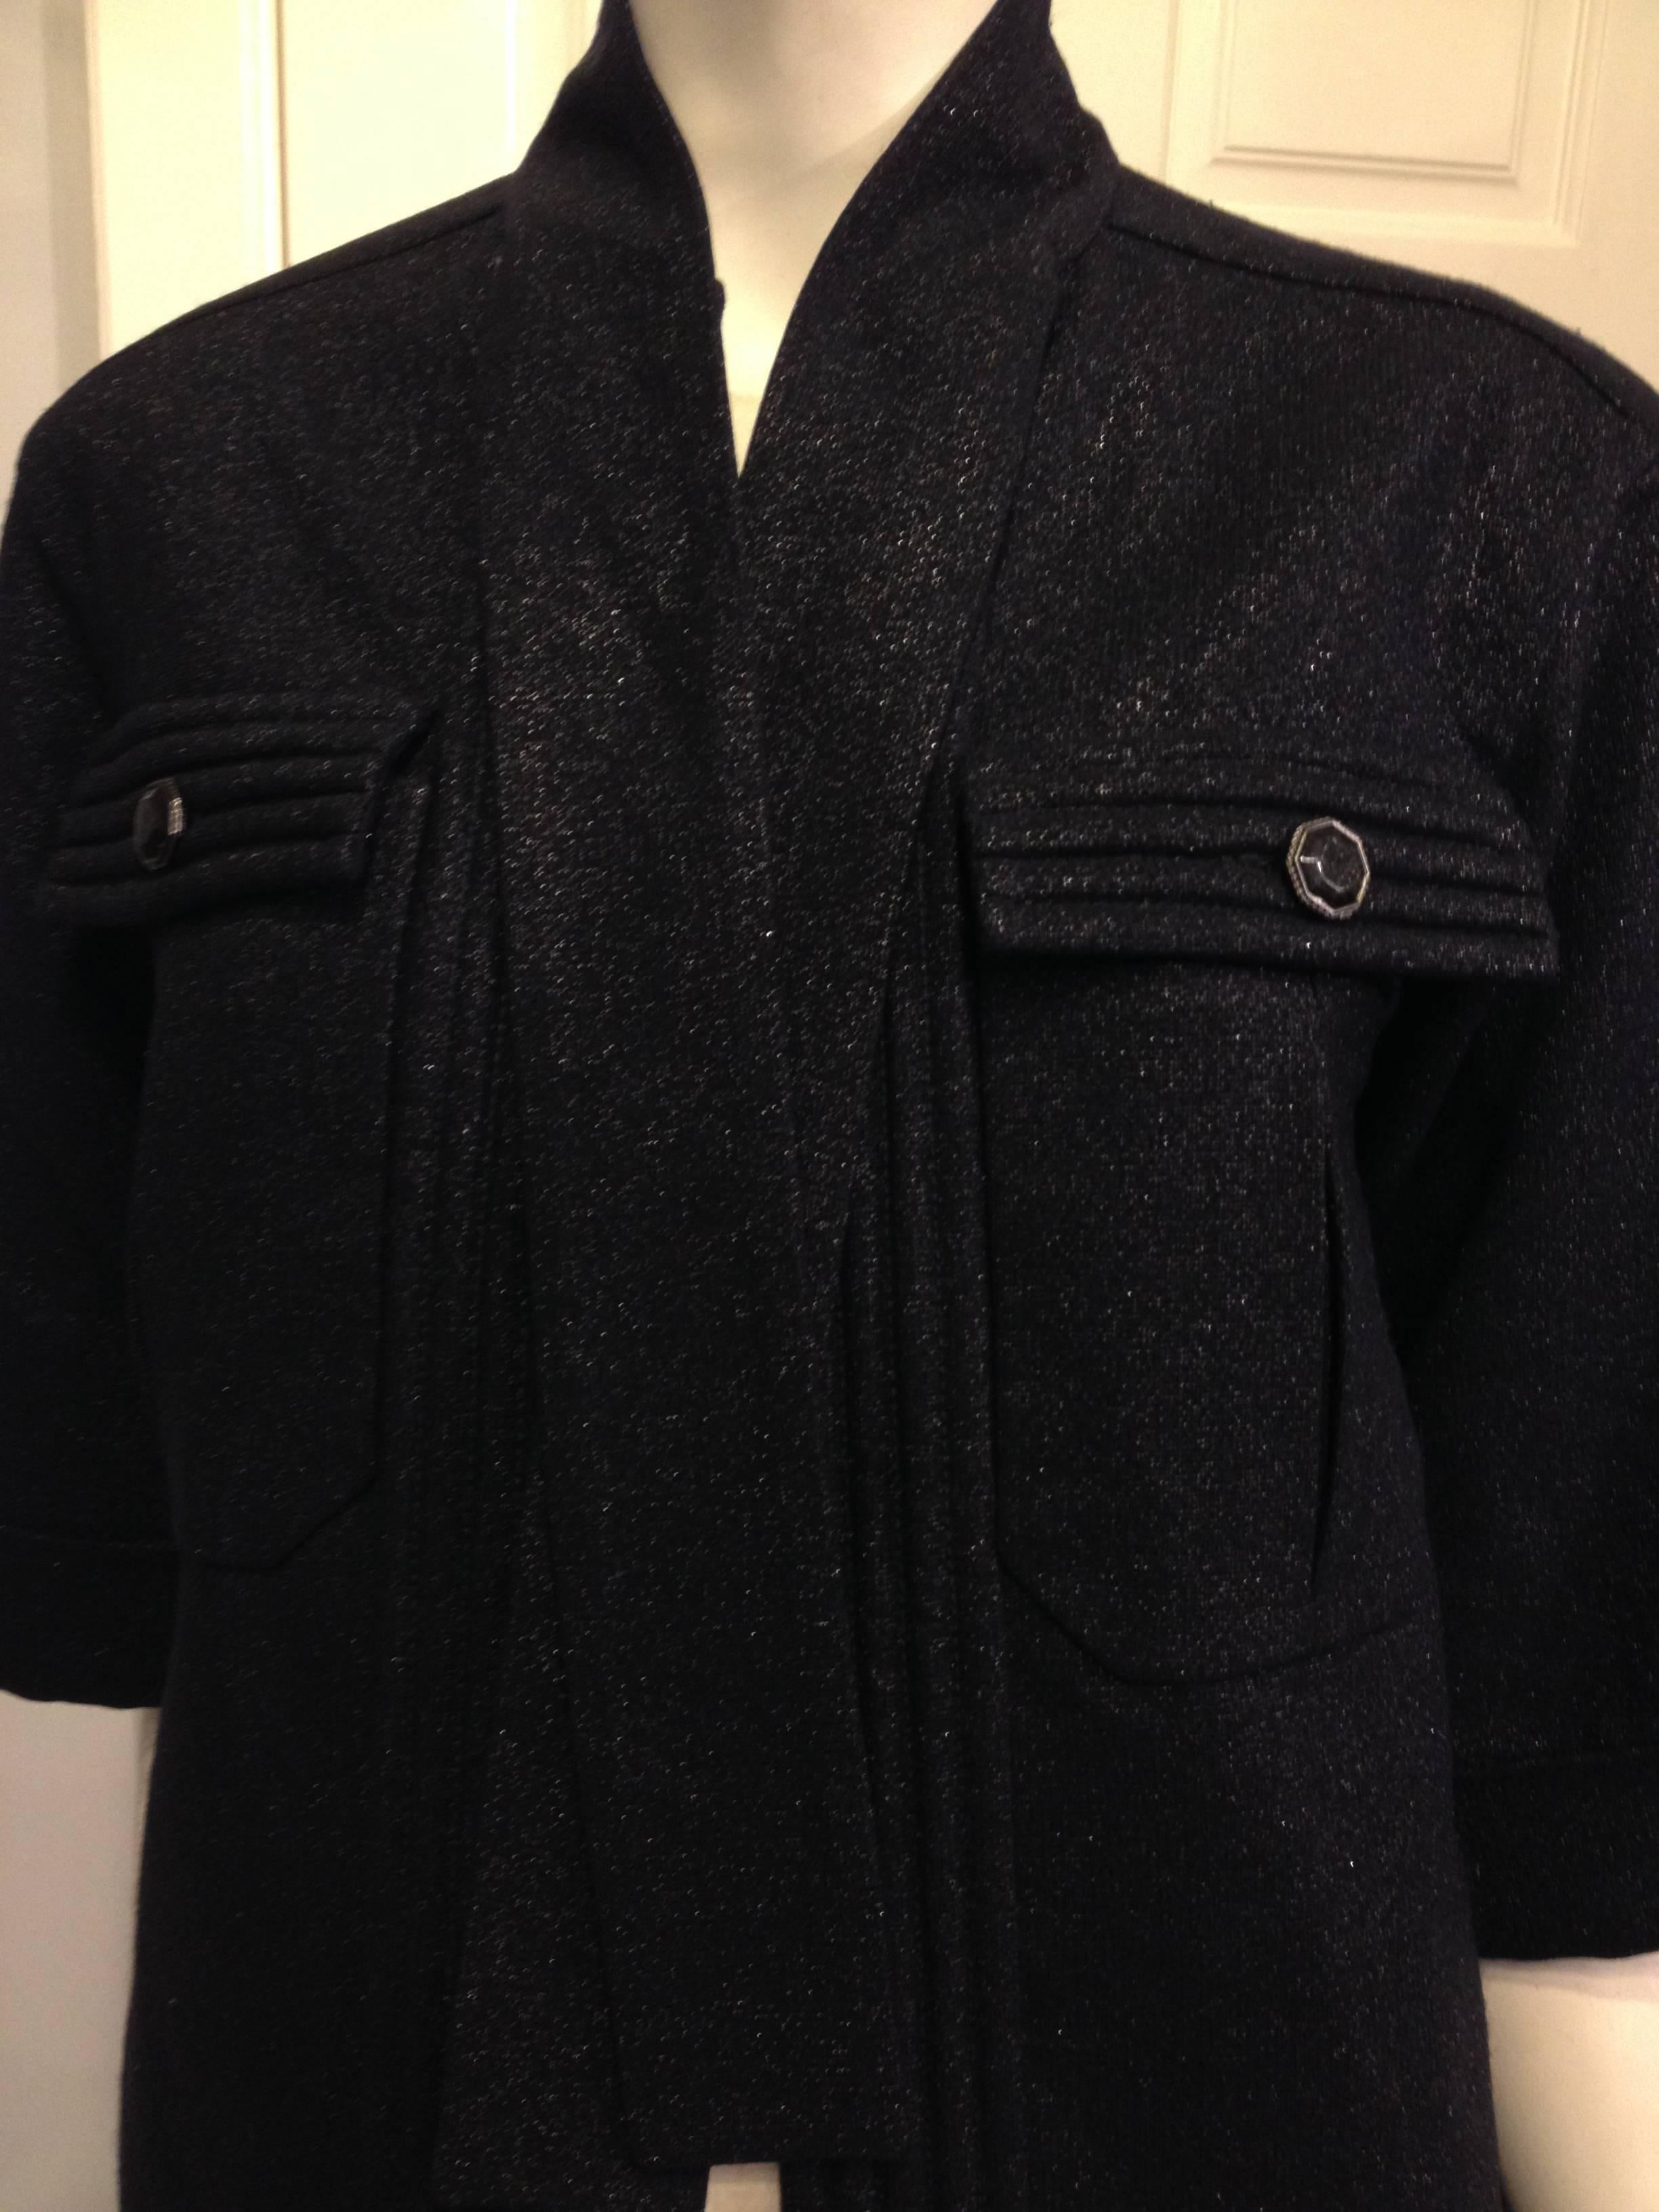 Chanel Navy Sparkly Jacket Size 34 (2) In Excellent Condition For Sale In San Francisco, CA